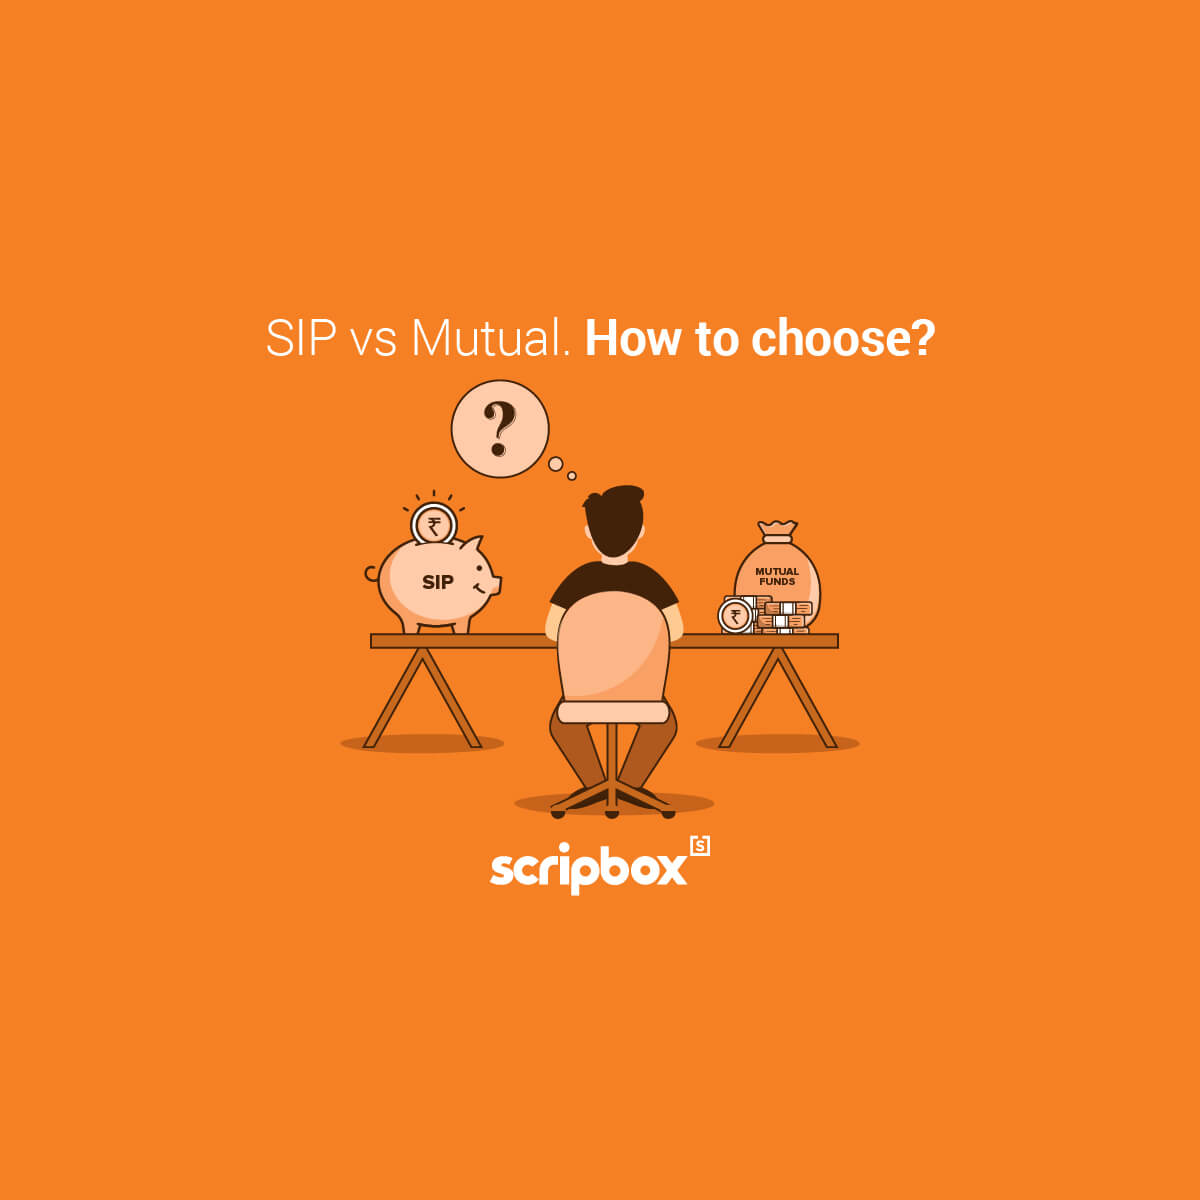 What Is The Difference Between SIP & Mutual Fund